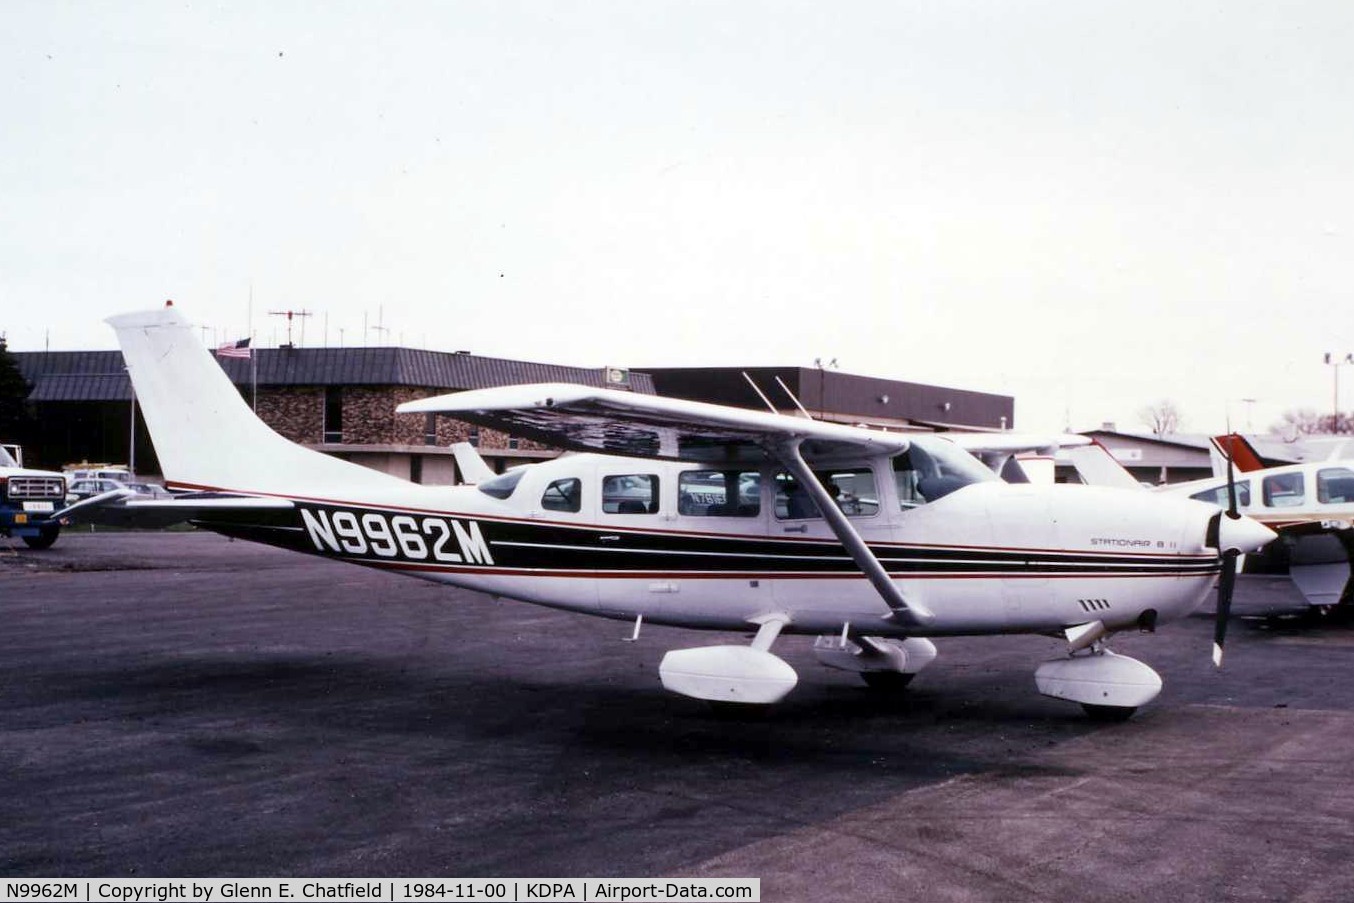 N9962M, 1983 Cessna T207A Turbo Skywagon 207 C/N 20700765, Photo taken for aircraft recognition training